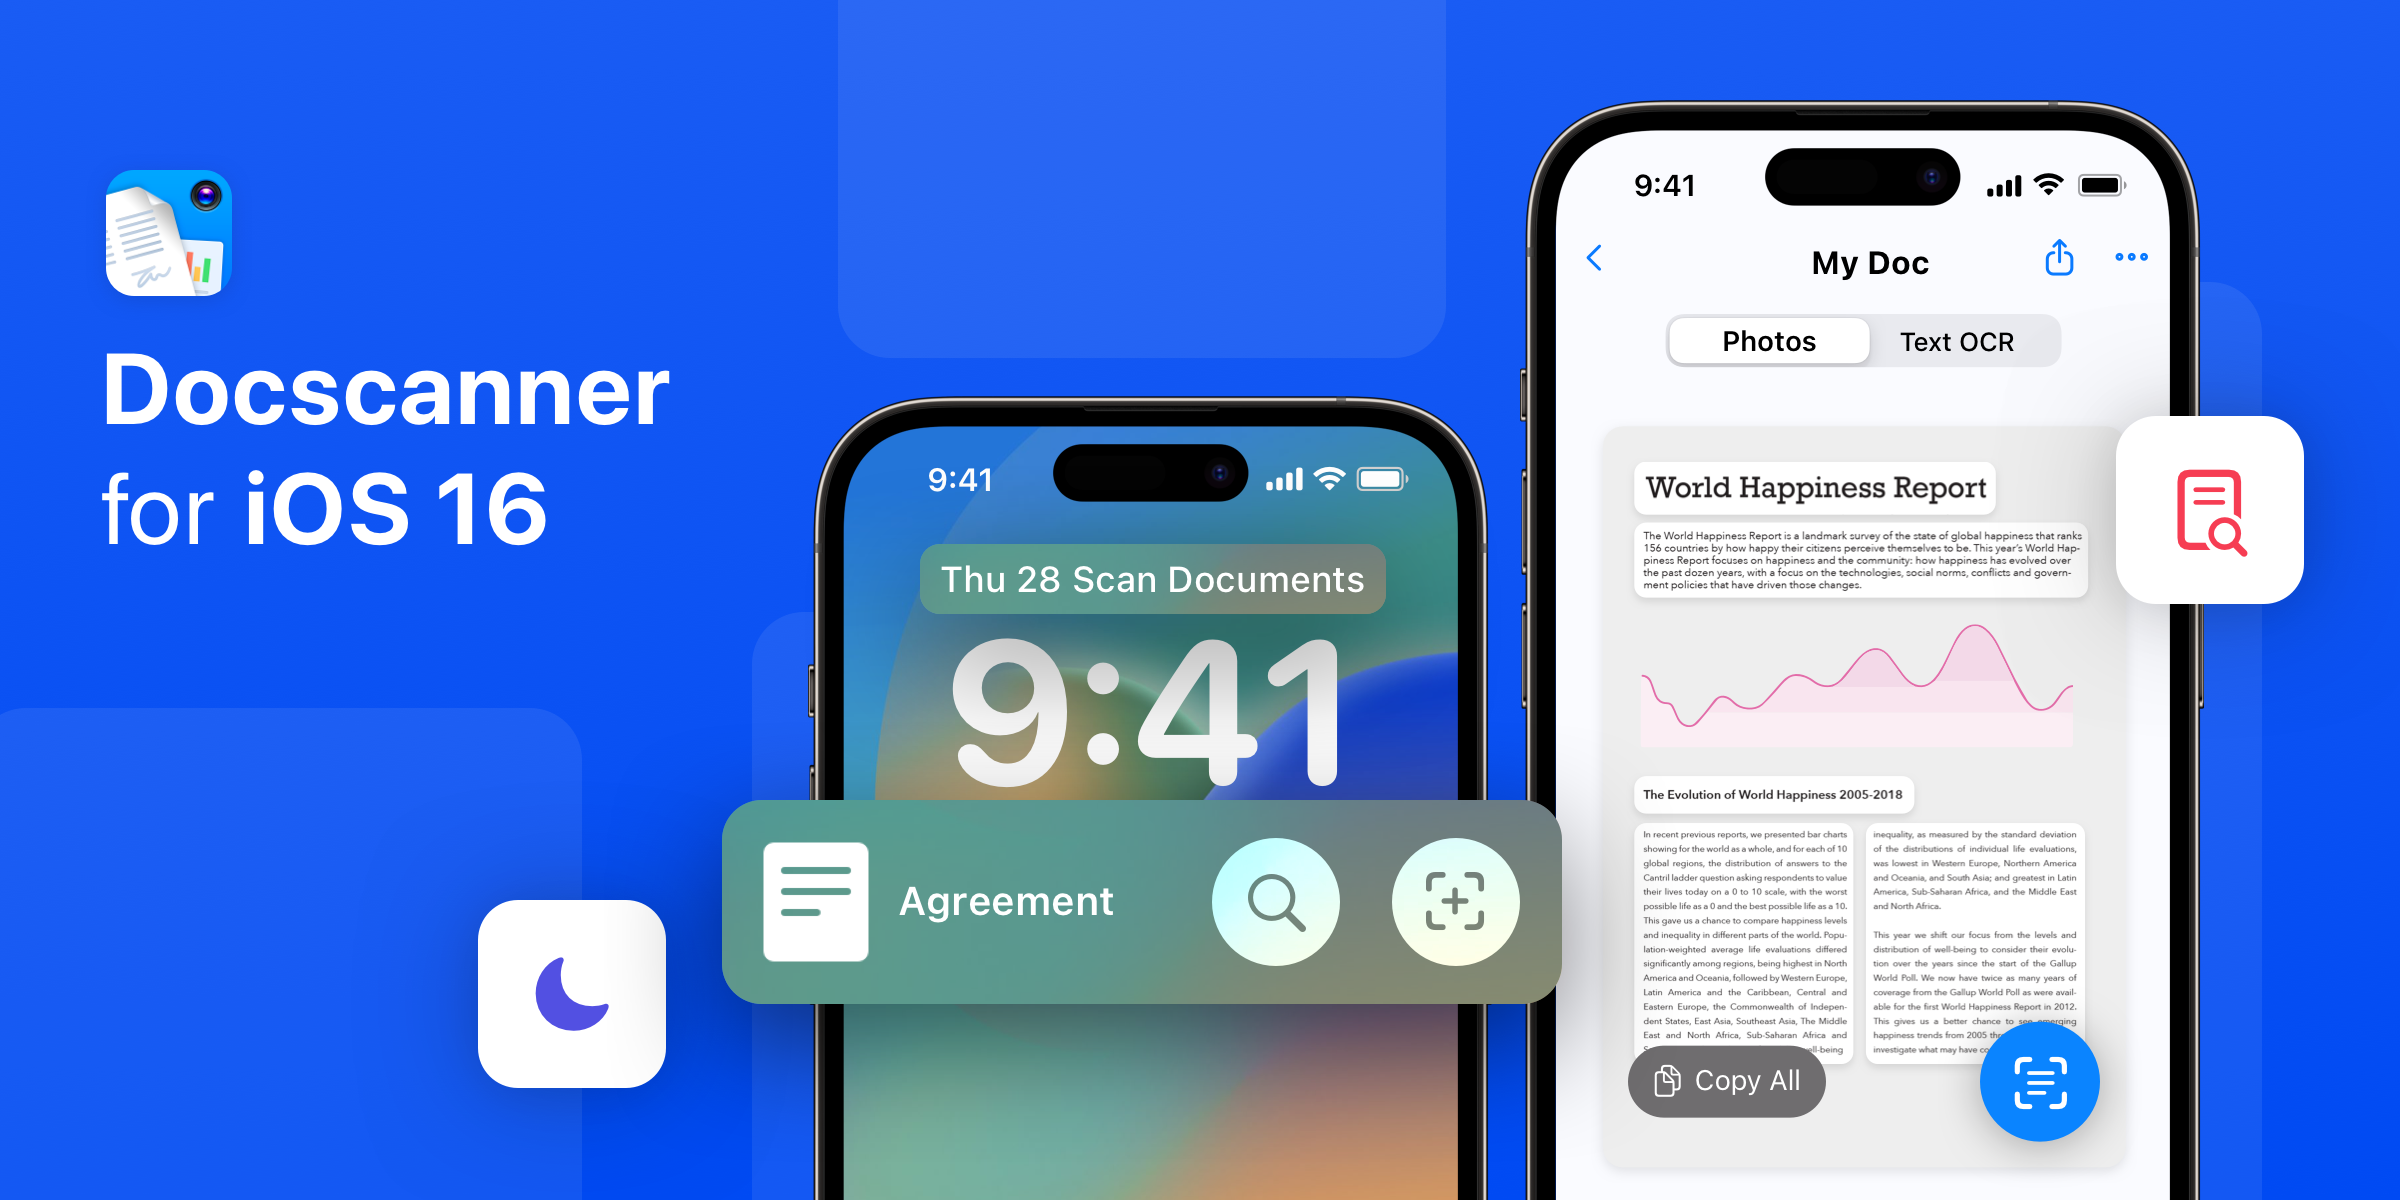 Doc Scanner: Stay on Top of Things With a Hassle-Free Scanning Experience in iOS 16